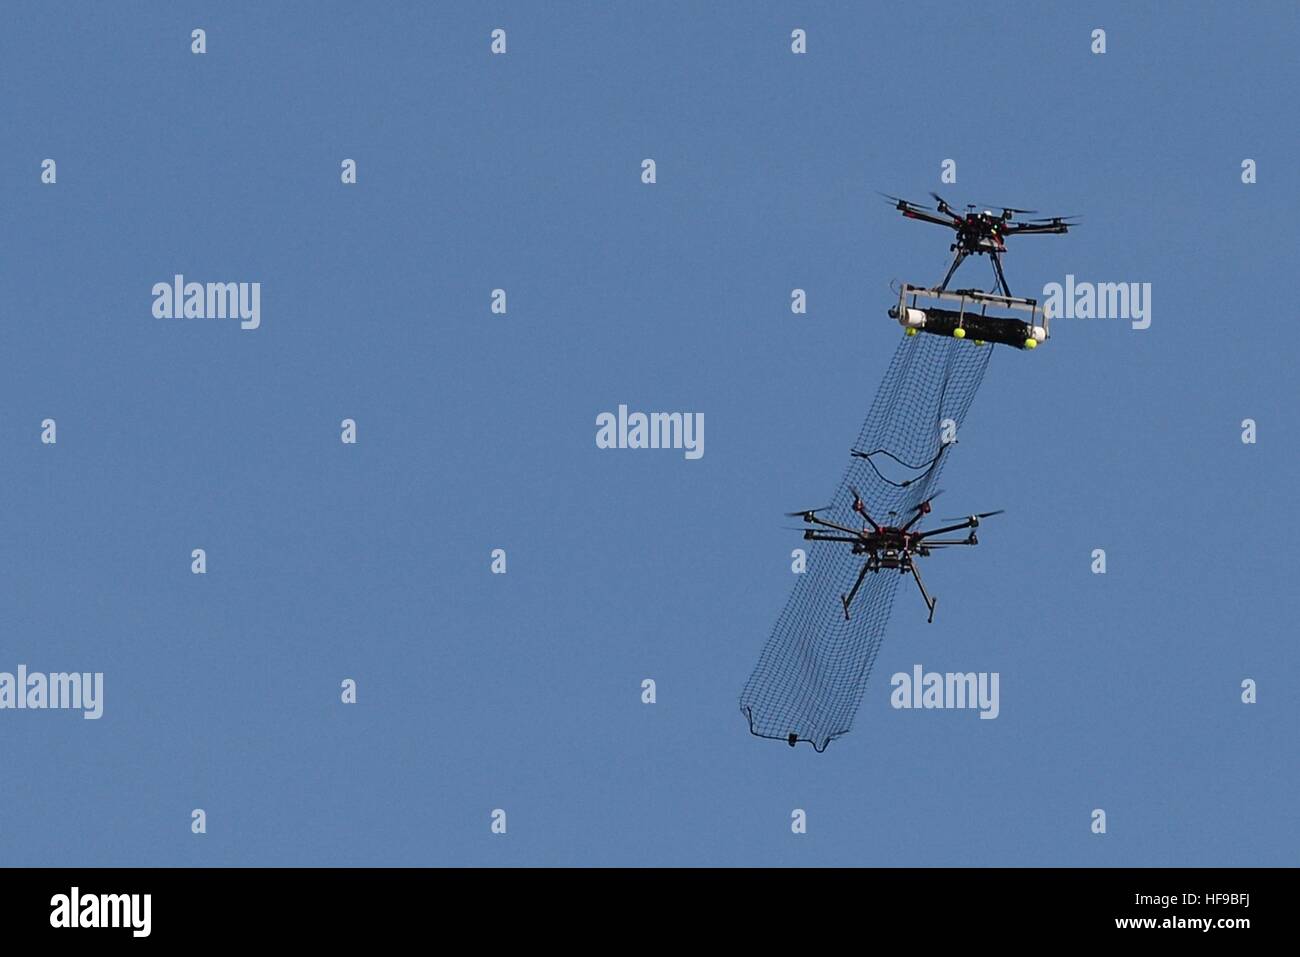 An unmanned aerial attack drone captures a DJI S1000 drone in its net mid-flight during the Air Force Research Laboratory Commanders Challenge at the Nevada National Security Site December 13, 2016 in Las Vegas, Nevada. Stock Photo